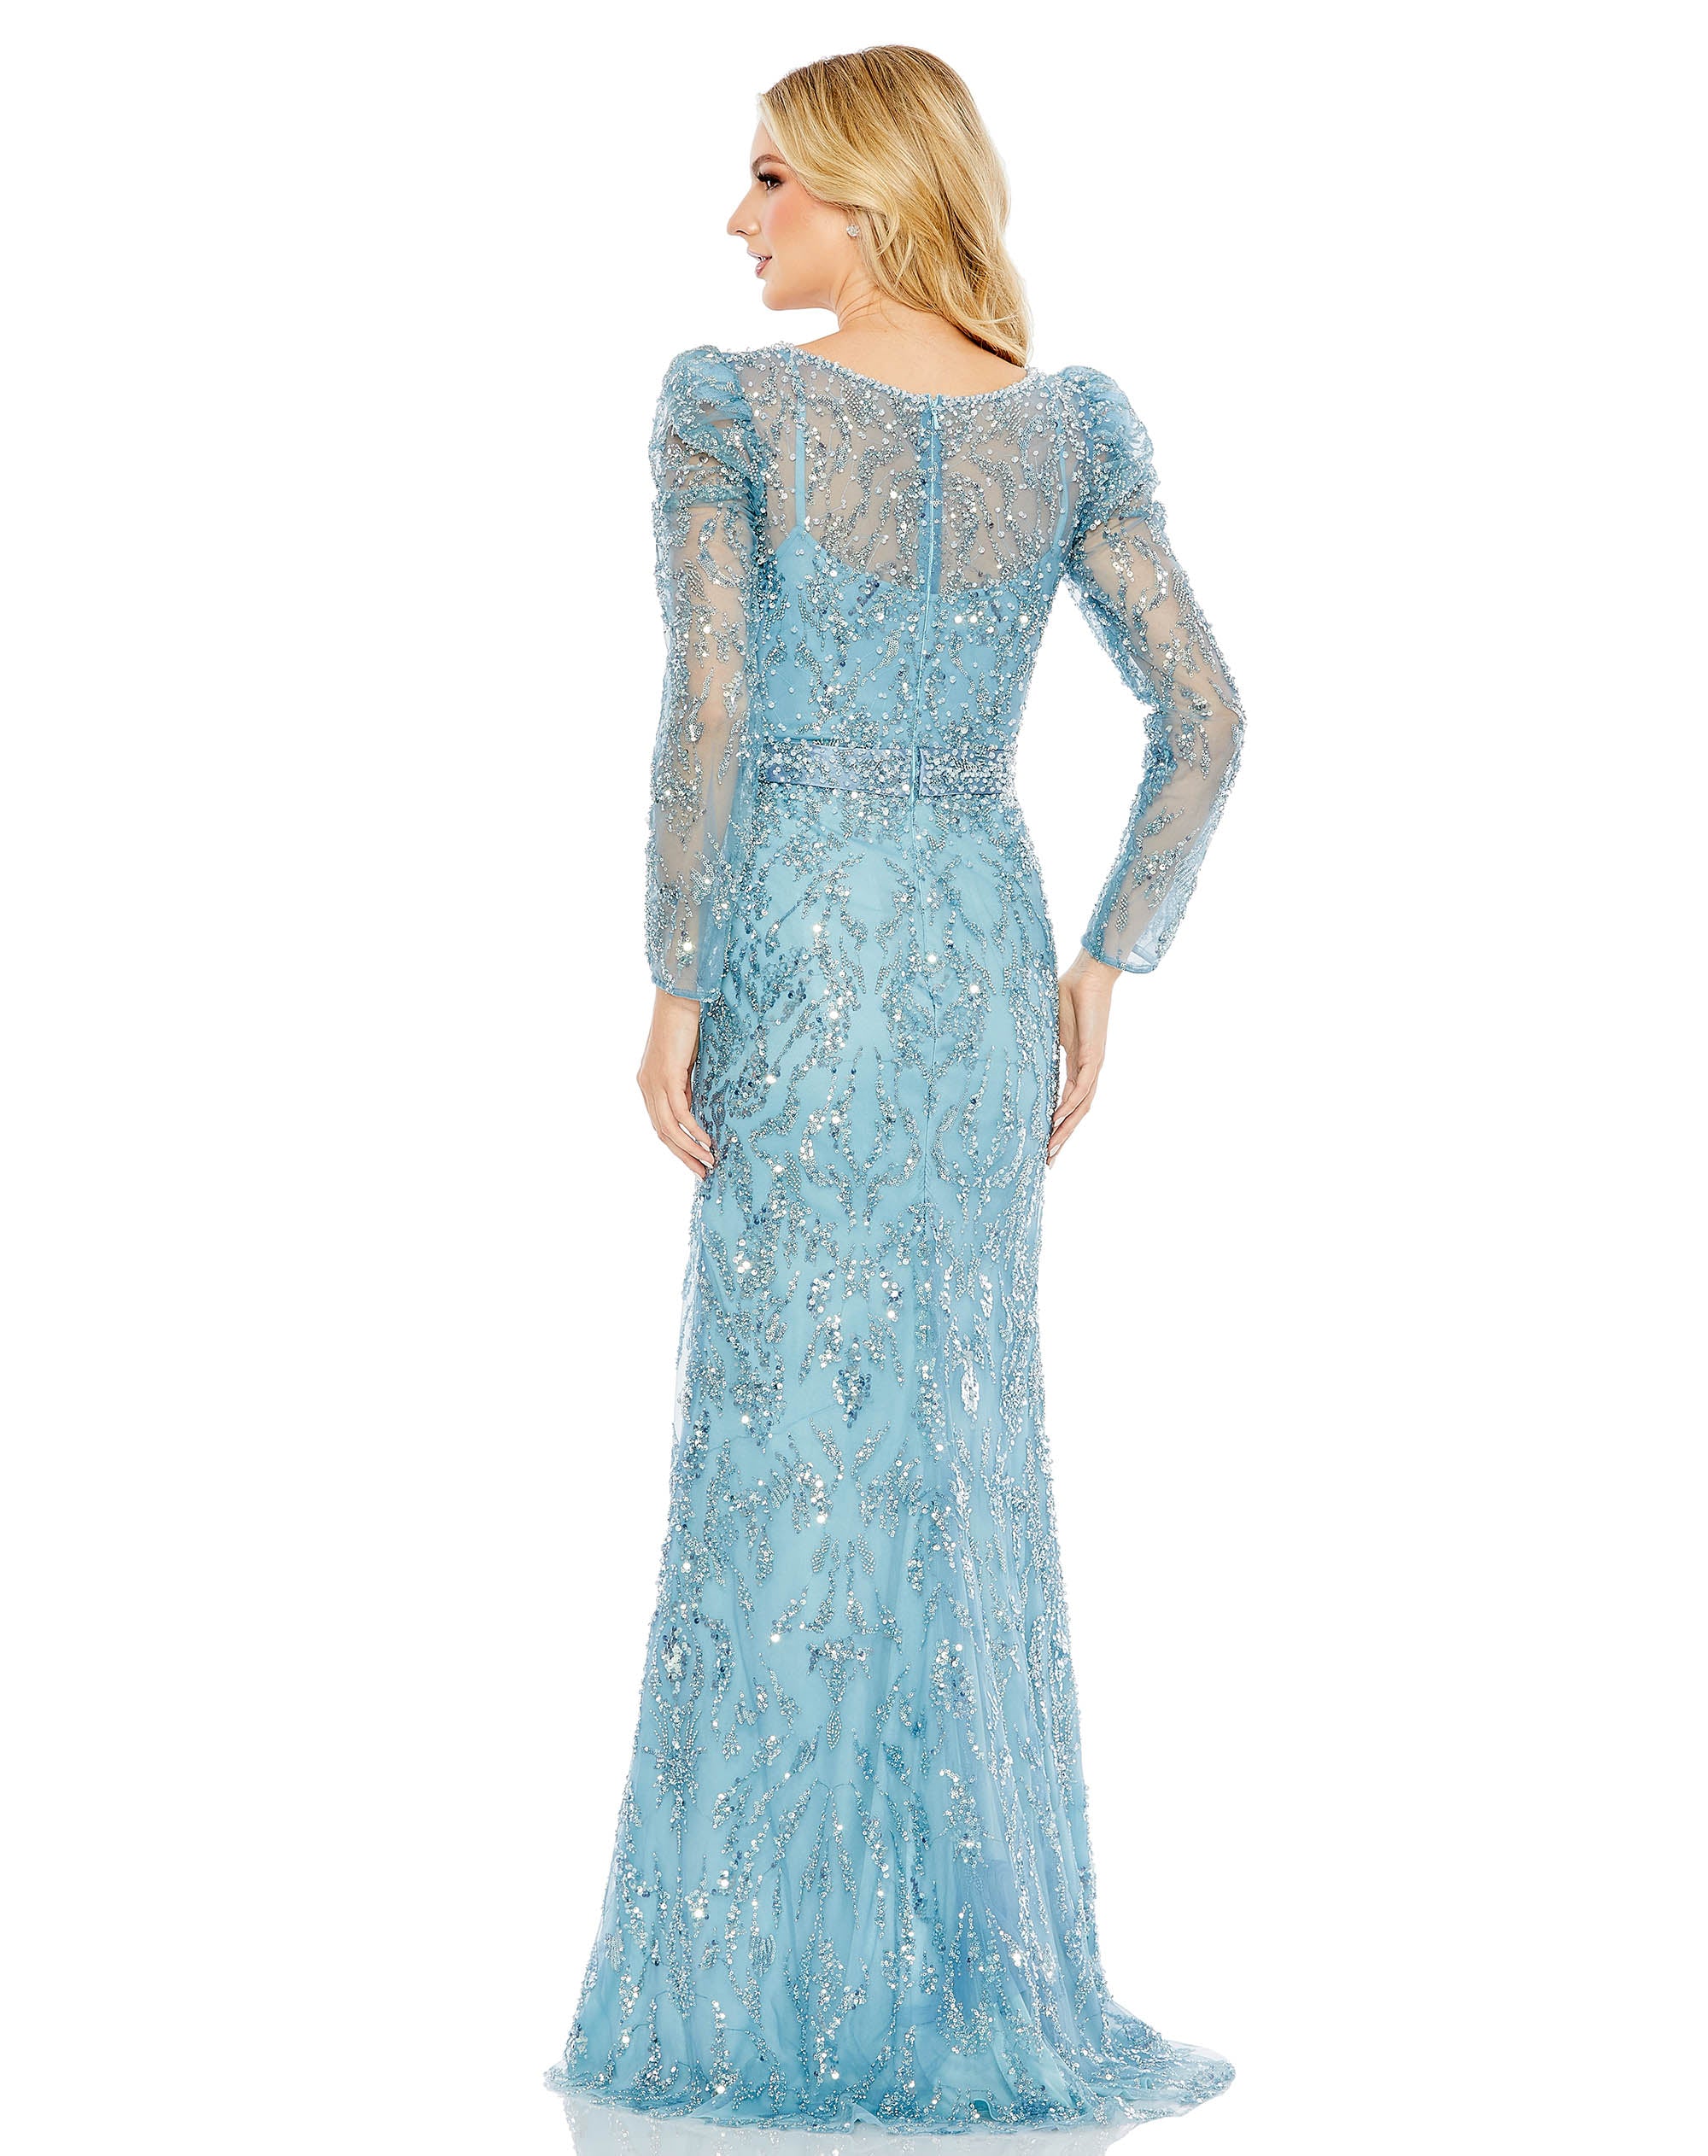 Wrap Around V-Neck Full Sleeve Sequin Embellished Gown